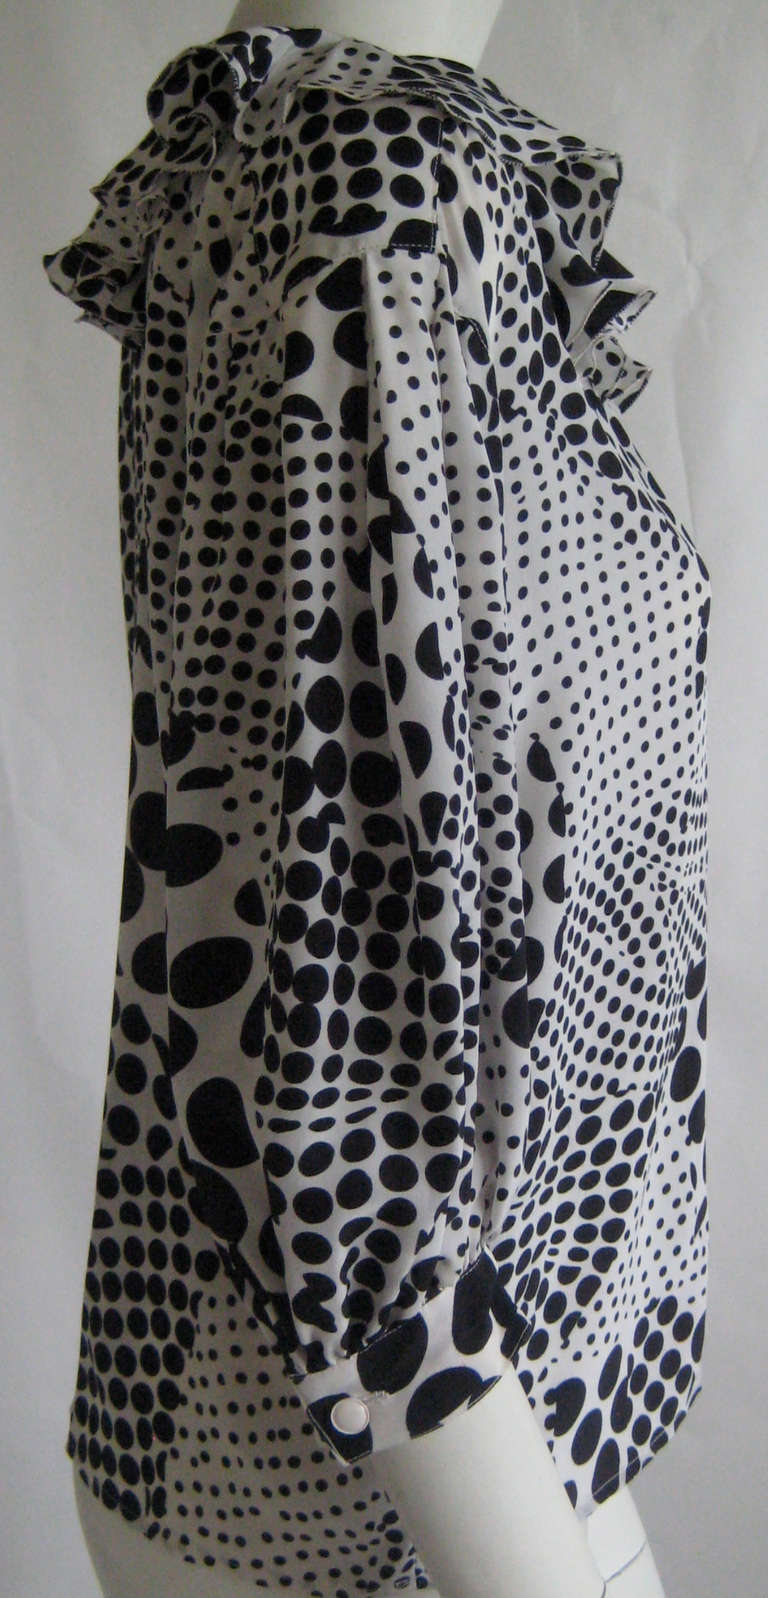 Lovely polka dot blouse
Ruffle at neckline 
100% silk
This slips on over the head with no closures 
3/4 length sleeves with button cuffs